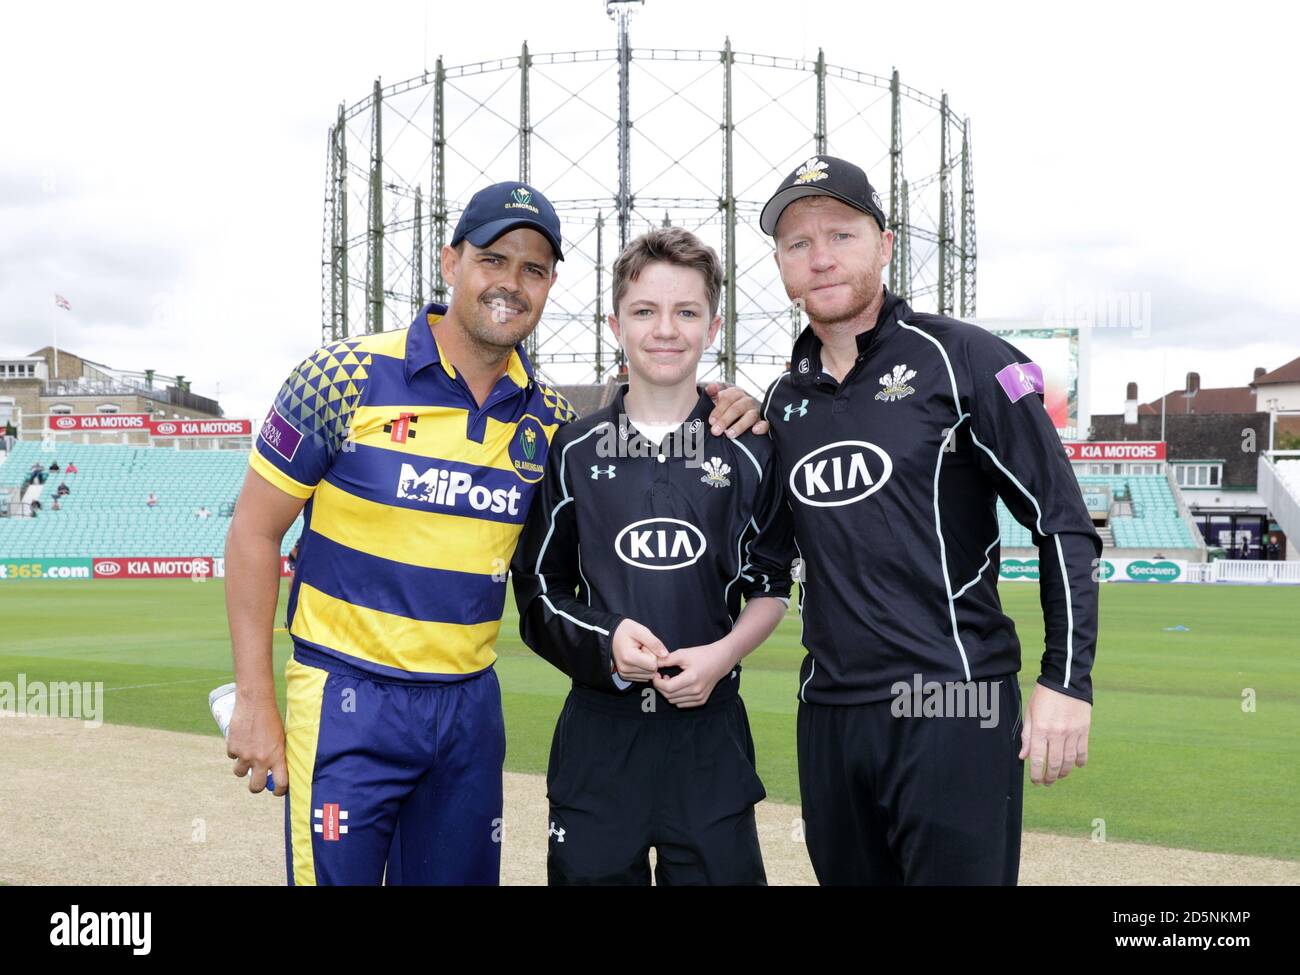 Glamorgan Captain Jacques Rudolph and Surrey Captain Gareth Batty pose with a young mascot prior to the match Stock Photo